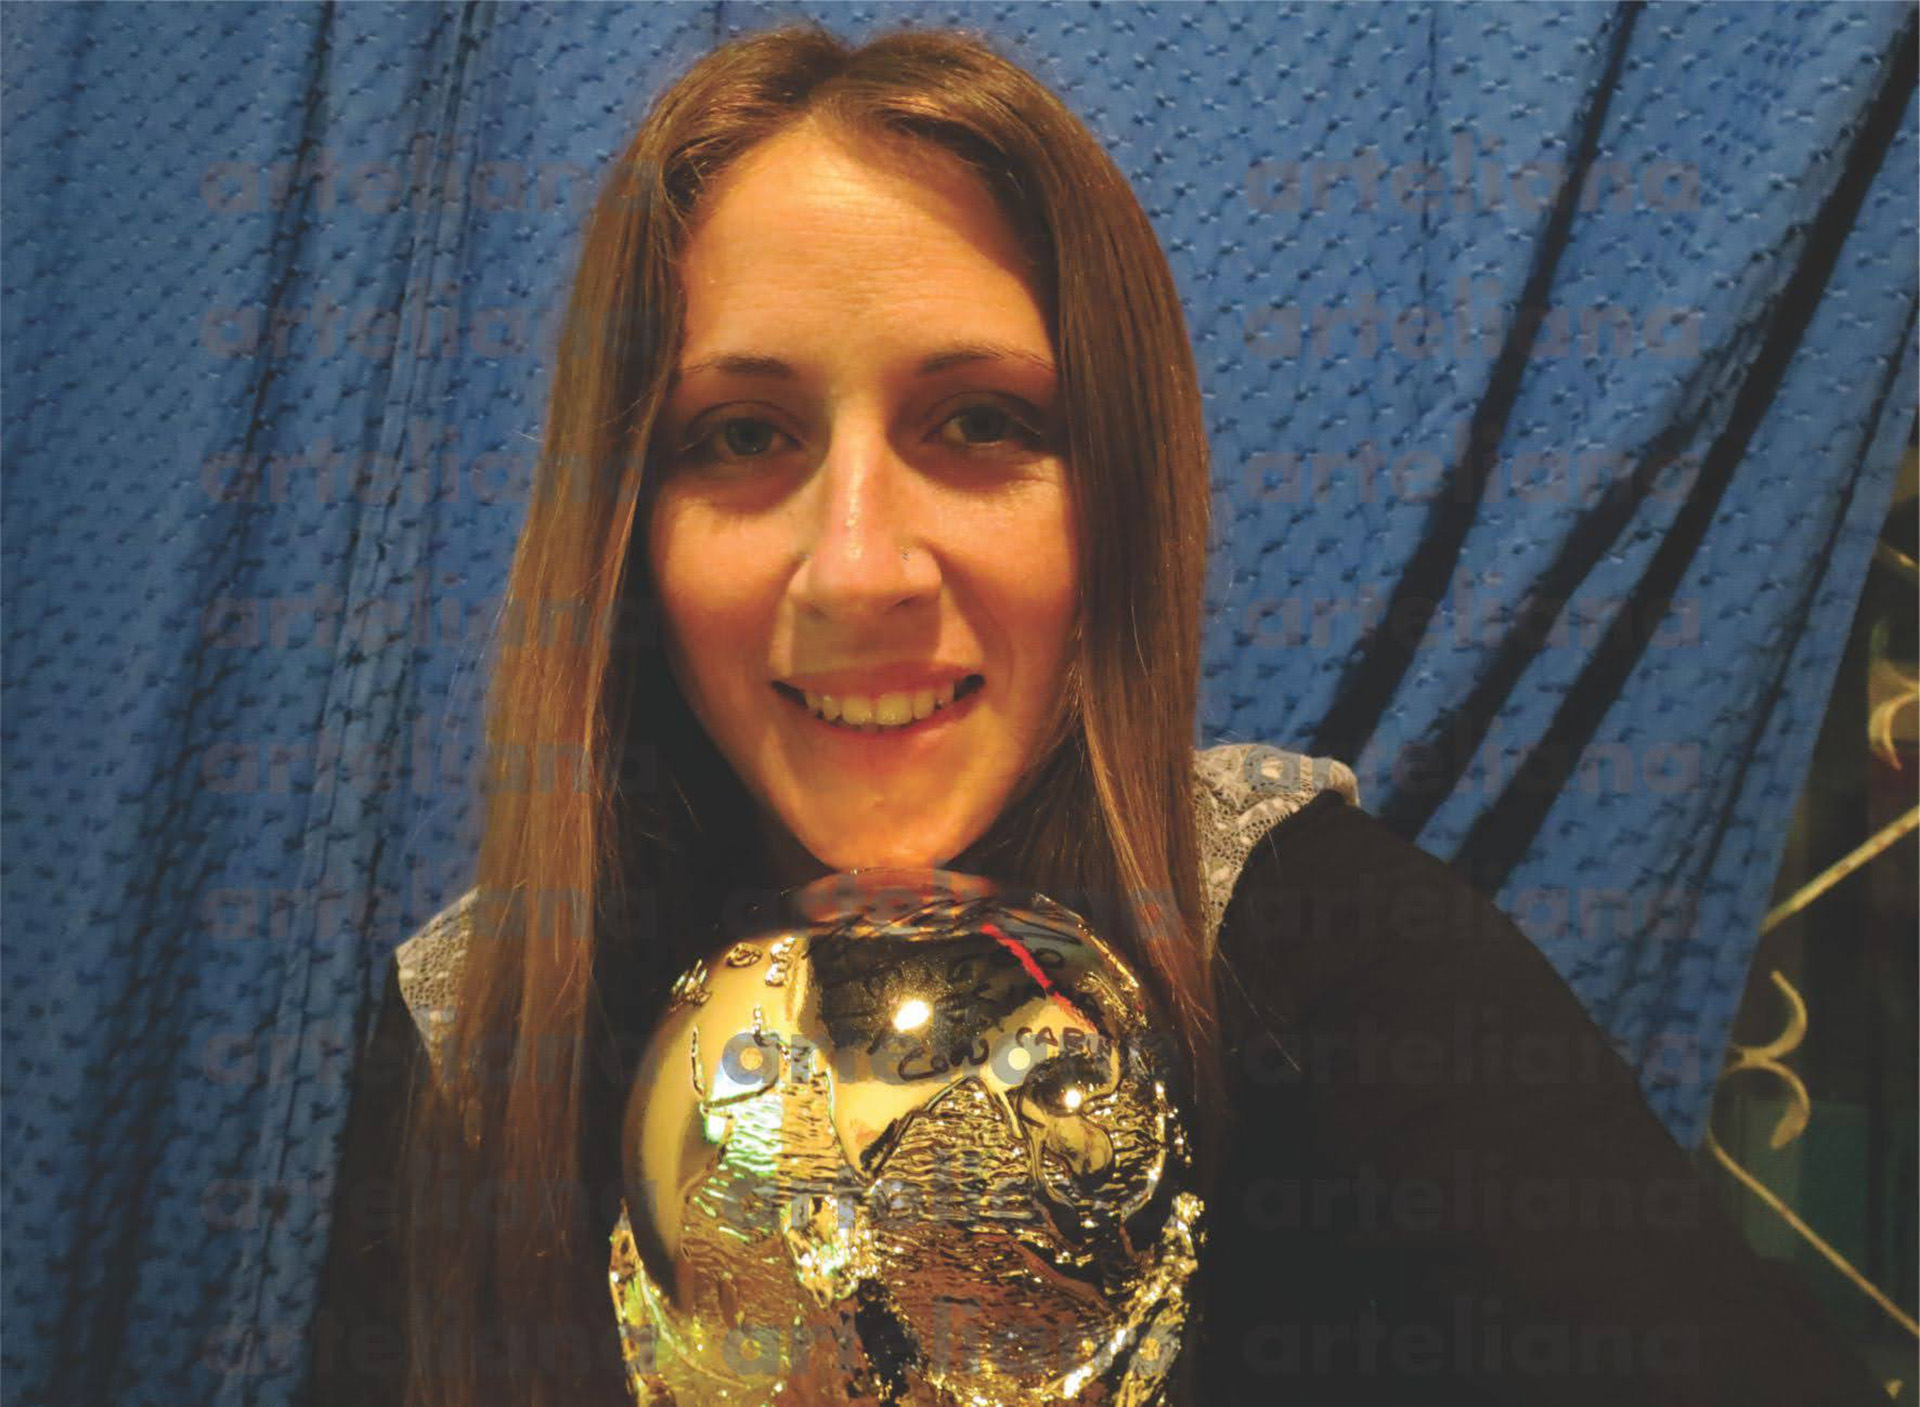 Eliana Pantano is 38 years old: in the photo she is holding the world cup that Diego Armando Maradona signed for her in 2013